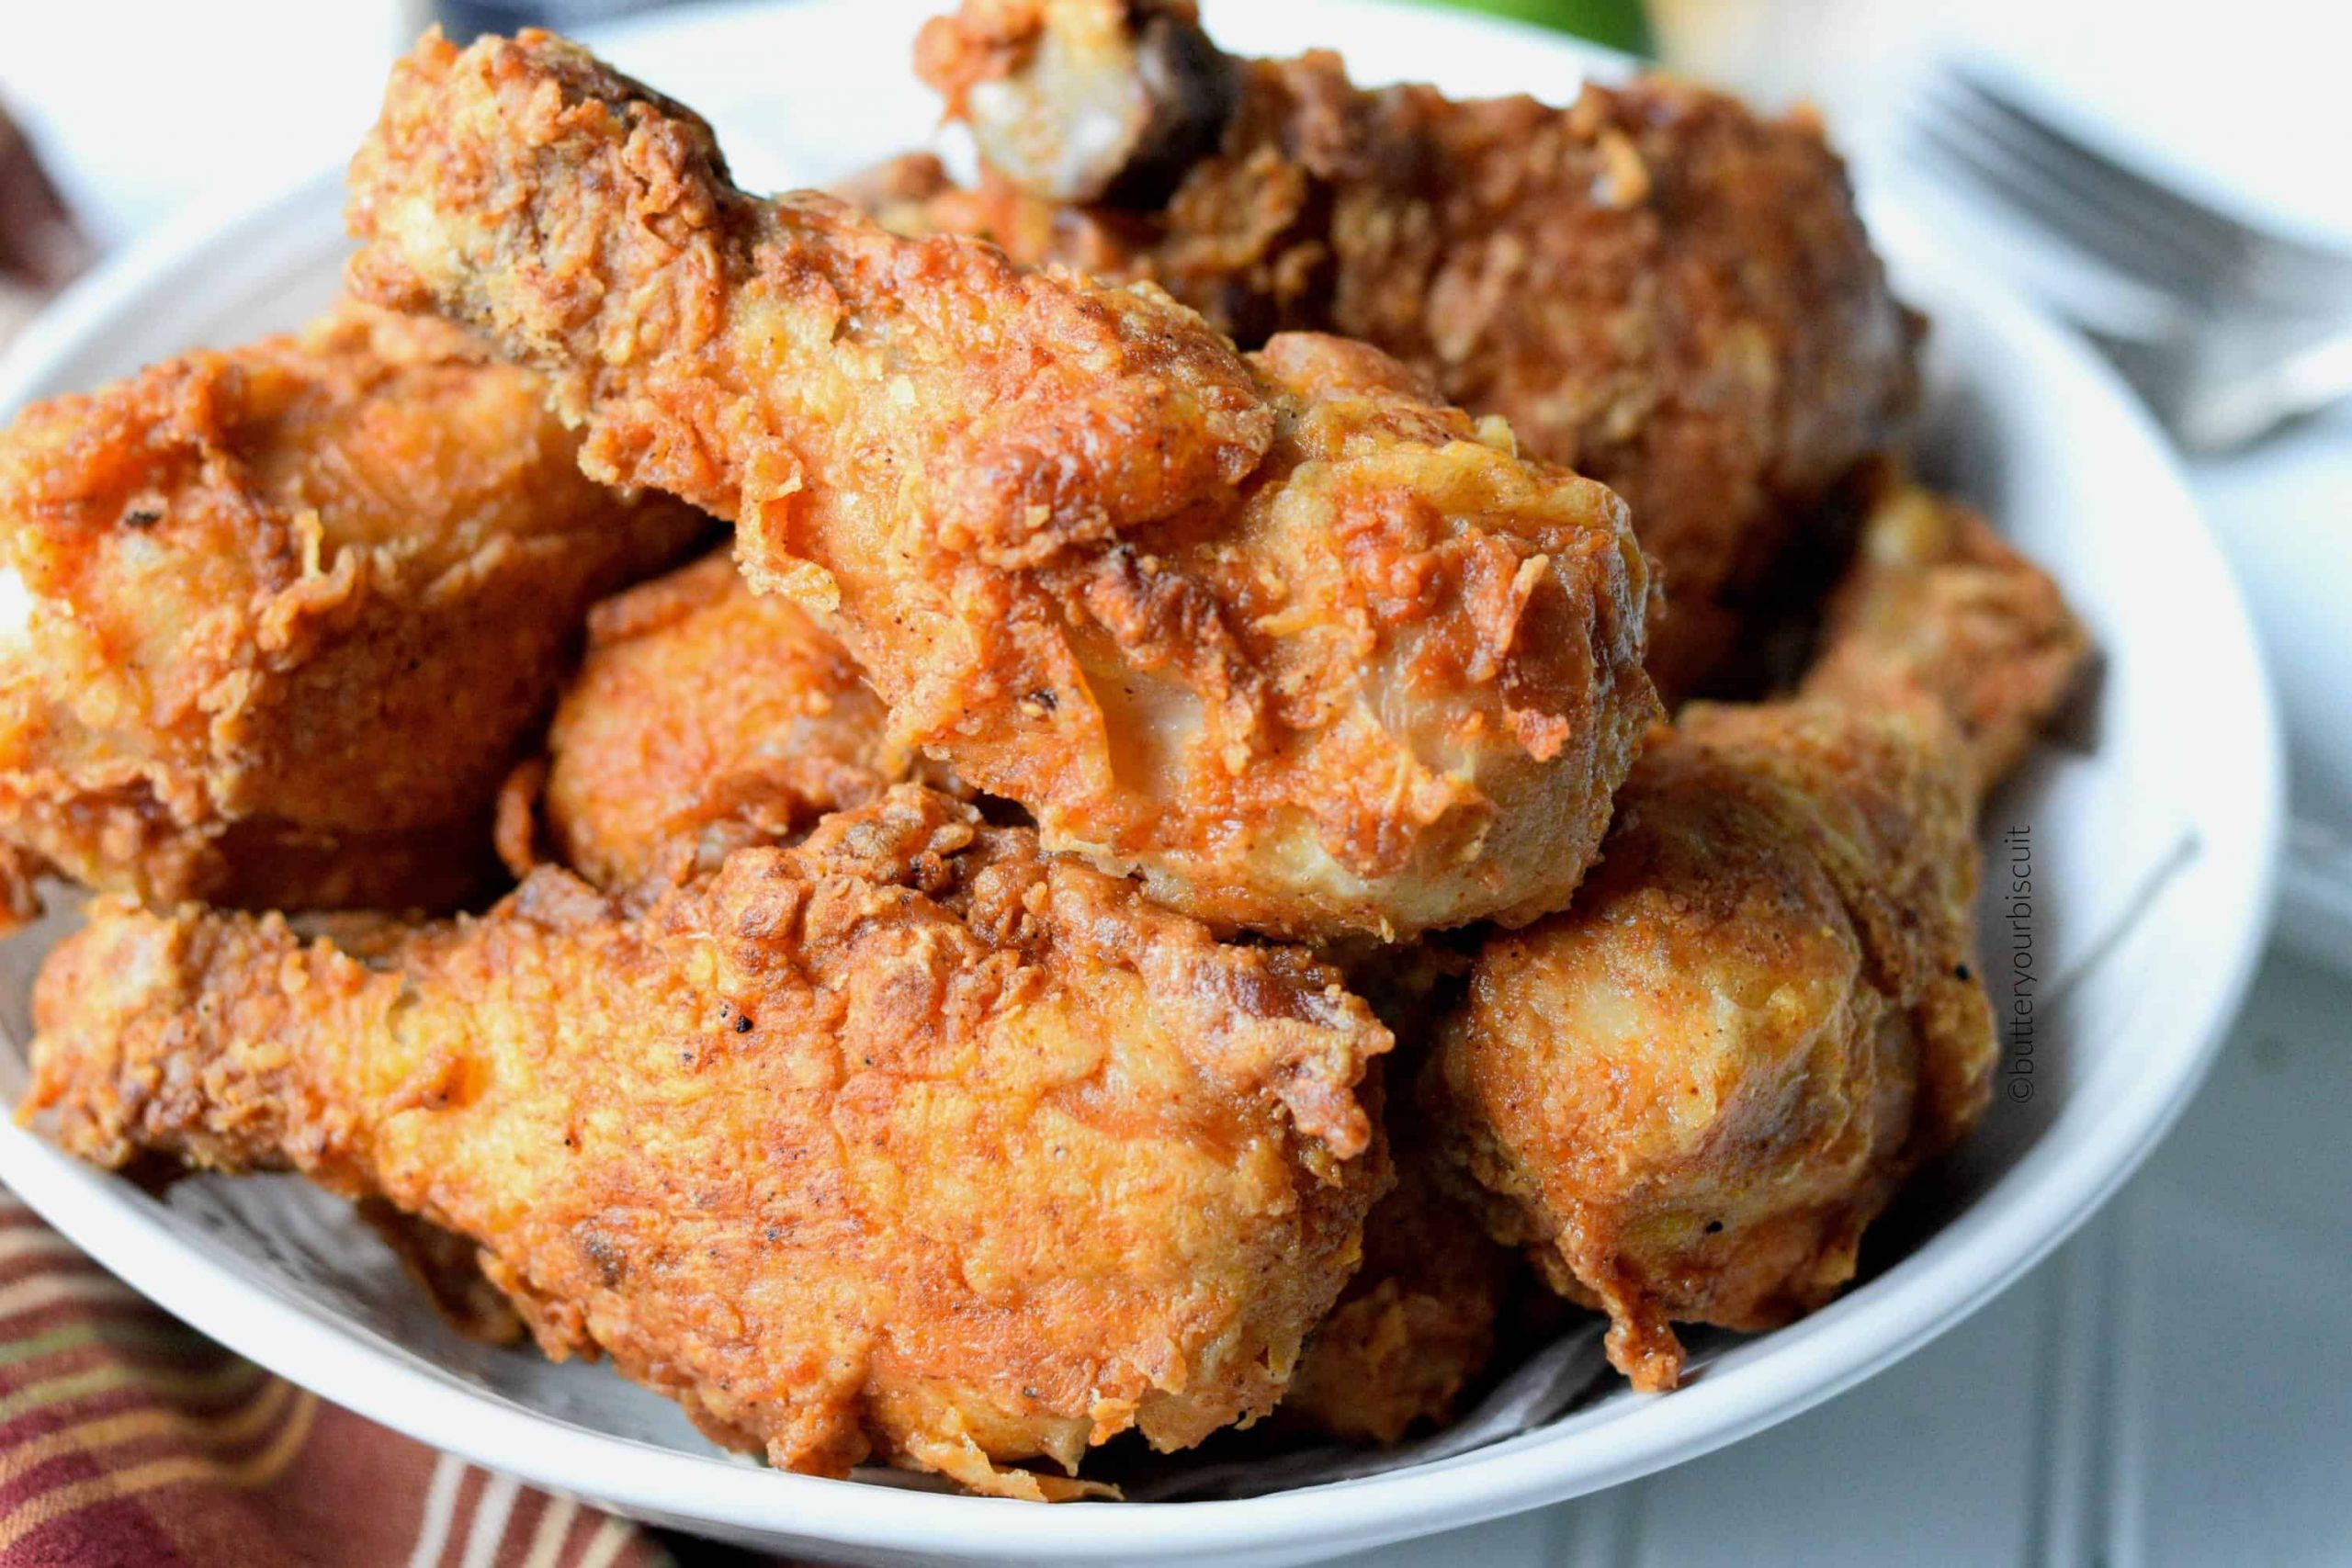 Deep Fried Chicken Legs Lovely Spicy Fried Chicken Legs Recipe butter Your Biscuit